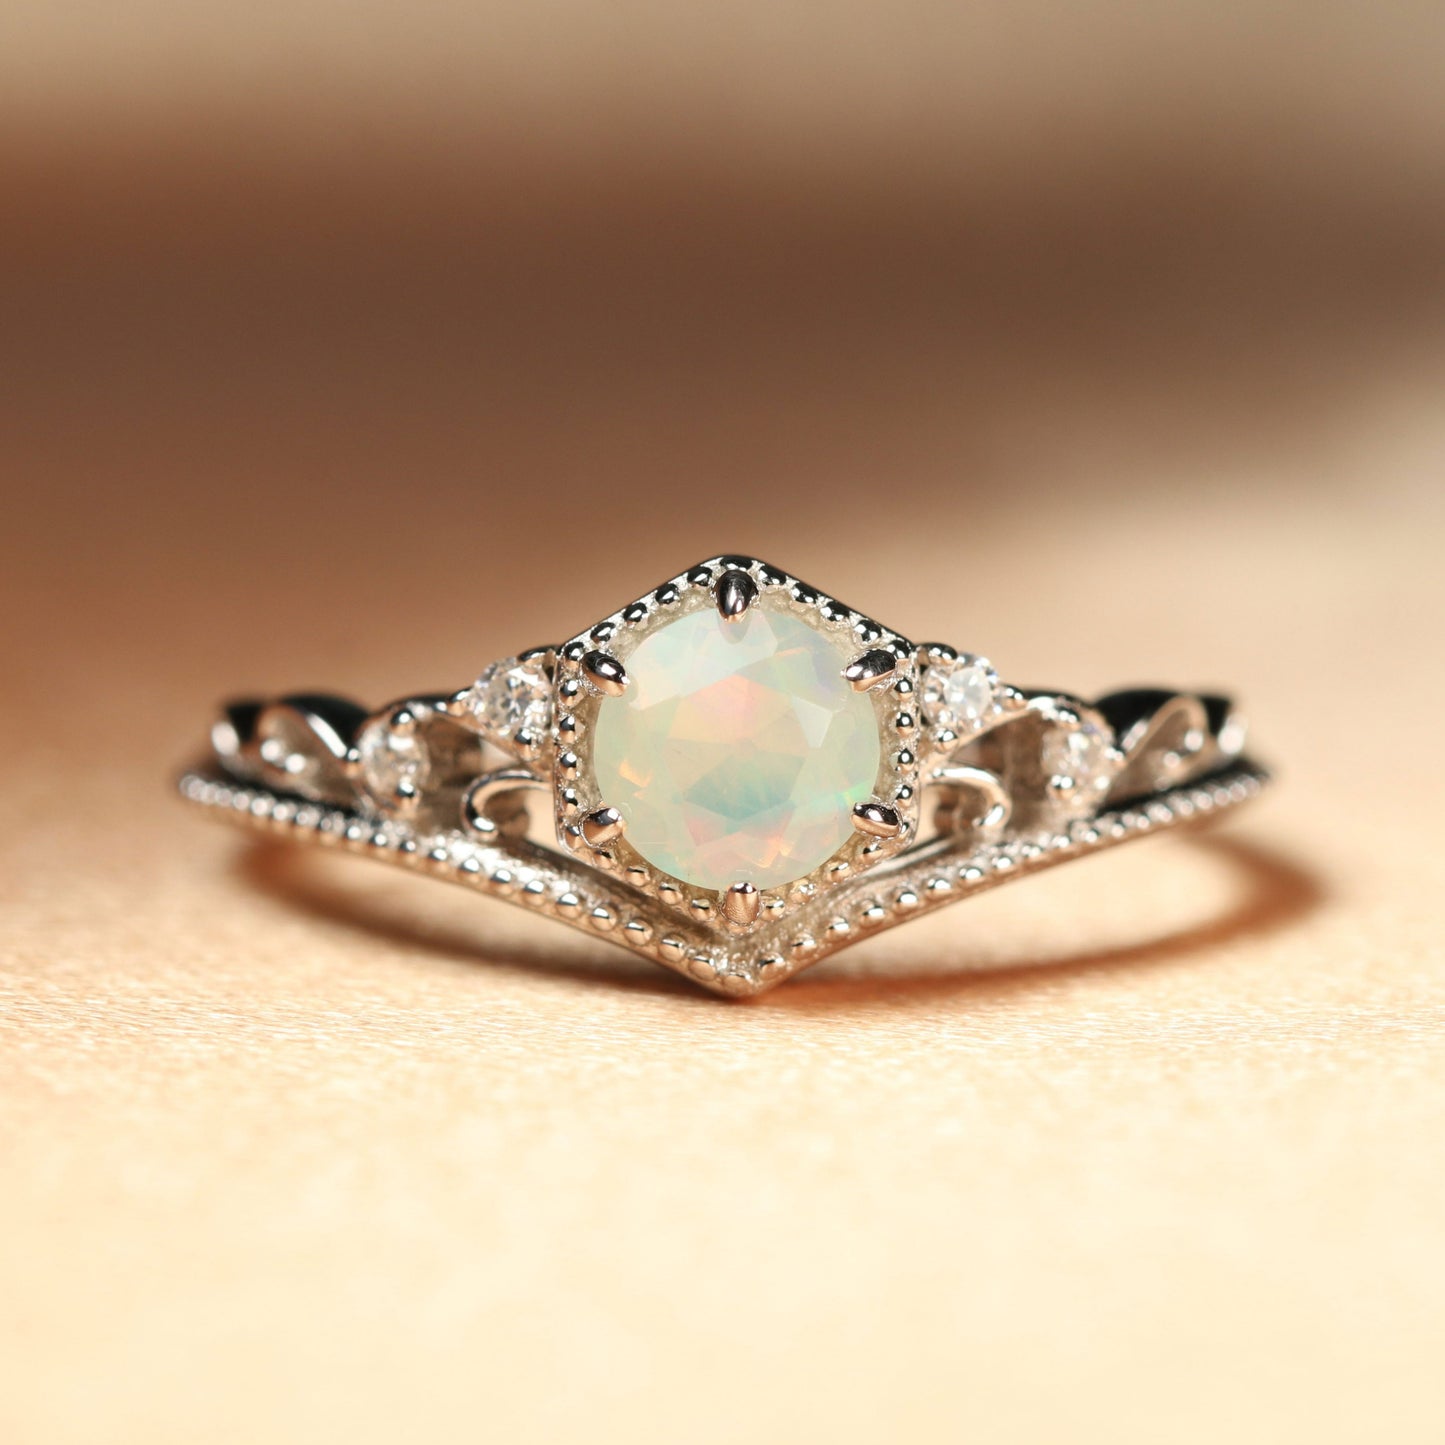 Vintage 0.55 carat Round cut Fire Opal Milgrain Filigree Engagement Ring in Gold.